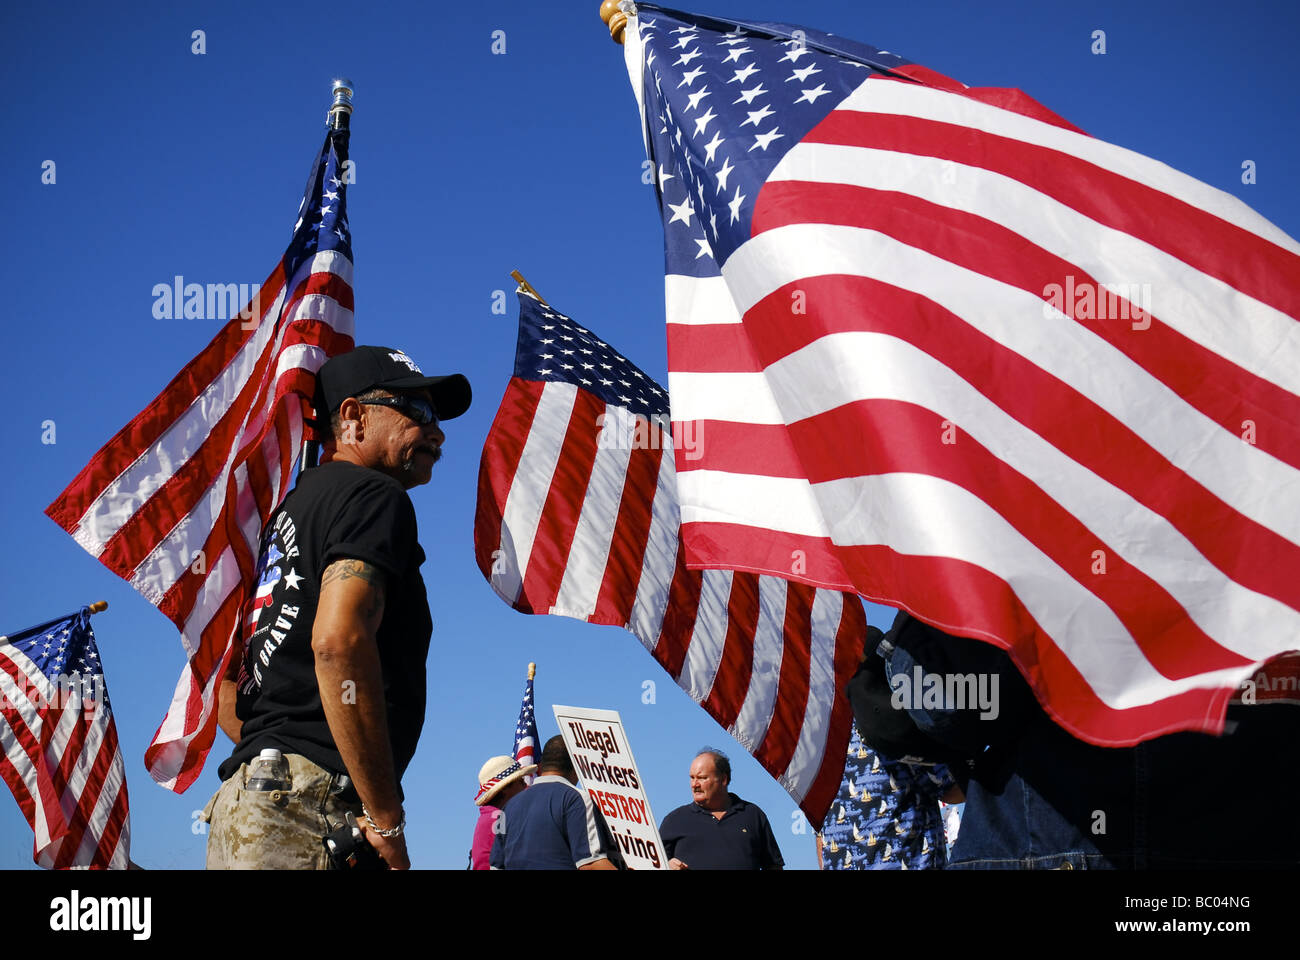 An immigration activist stands surrounded by waving American flags at a Minute Men ralley in San Diego, California. Stock Photo